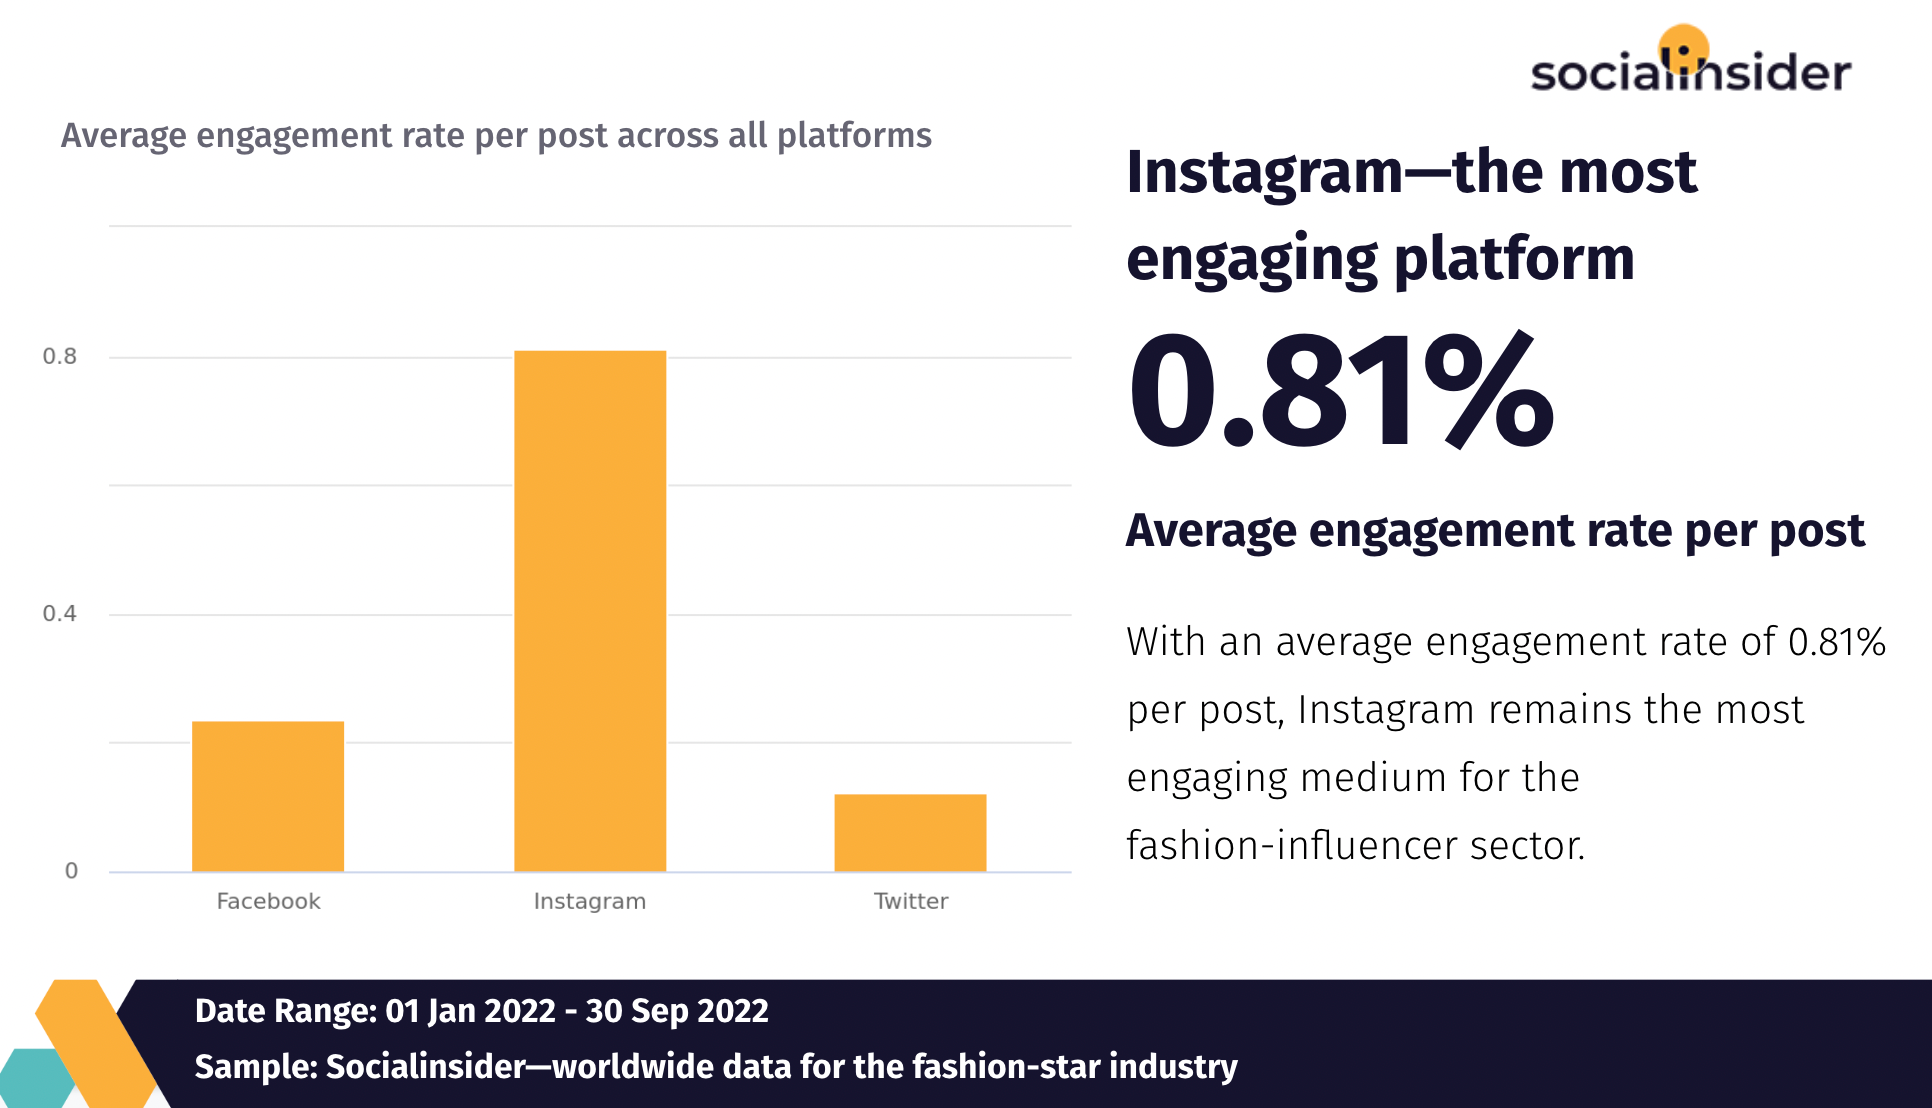 A screenshot form industry reports q3 2022 with the most engaging platform for fashion-influencer